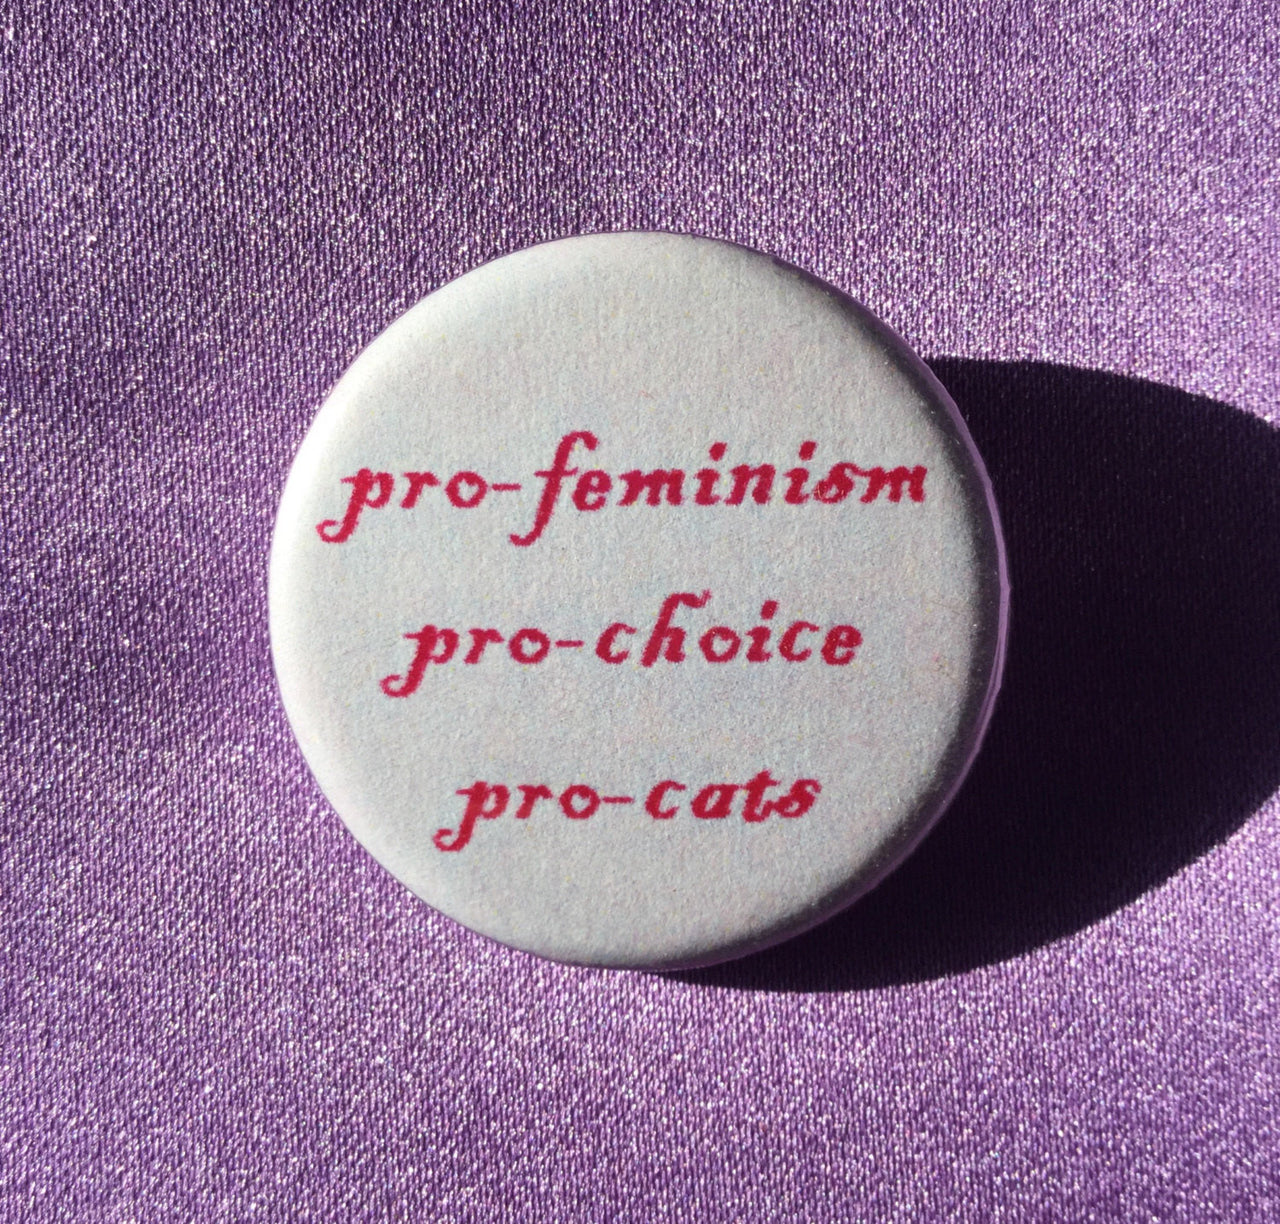 Pro-feminism, pro-choice, pro-cats - Radical Buttons